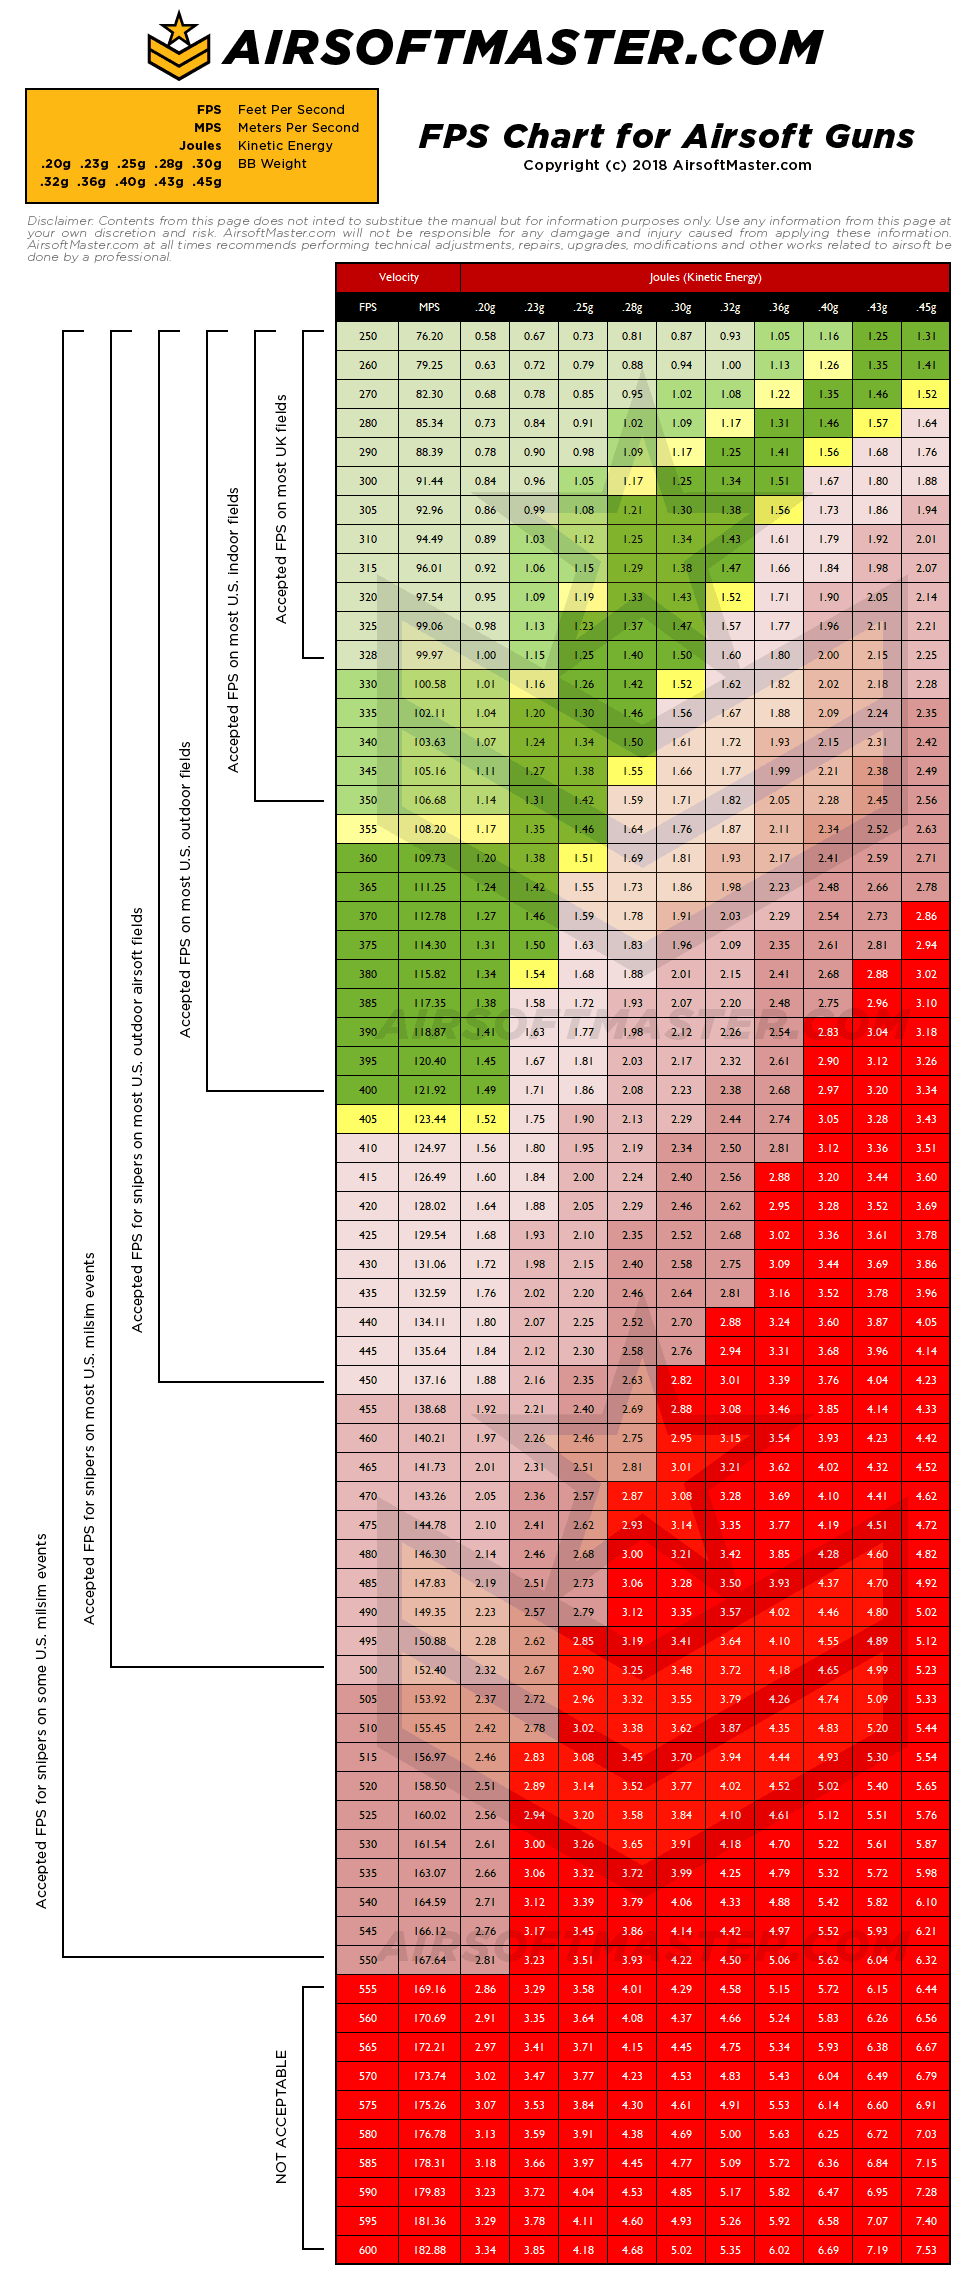 airsoft-master-fps-chart.gif?t=151754944